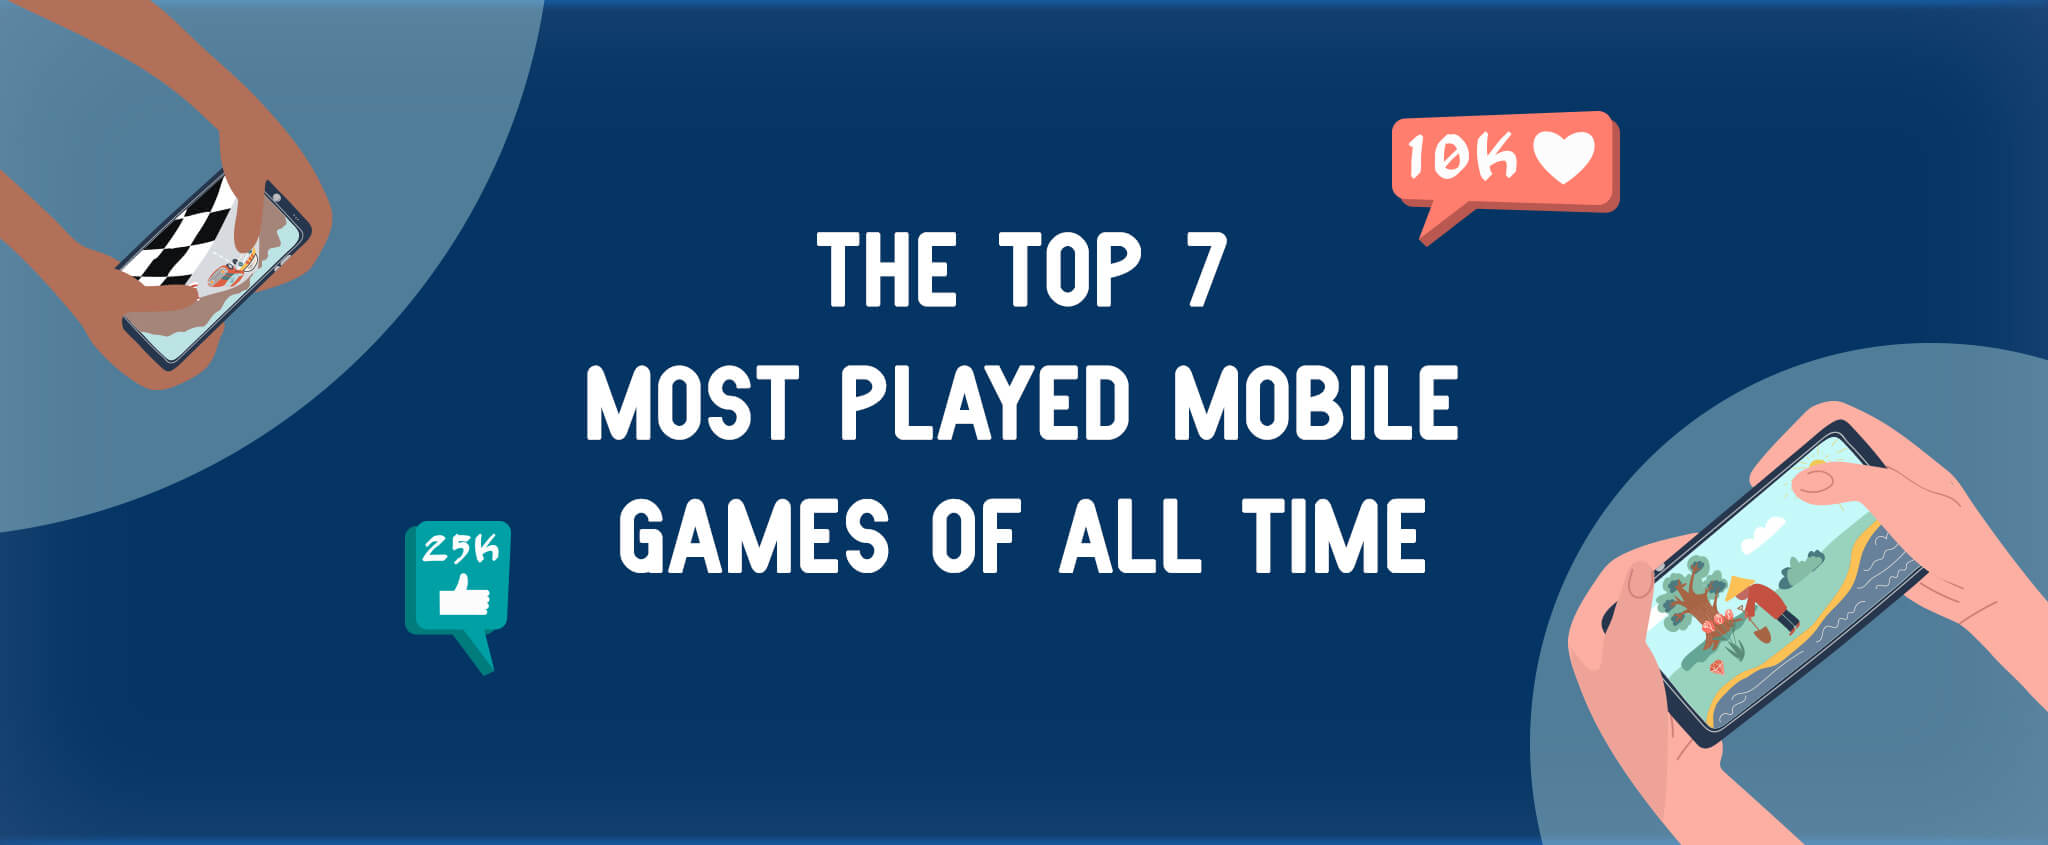 The Top 7 Most Played Mobile Games of All Time